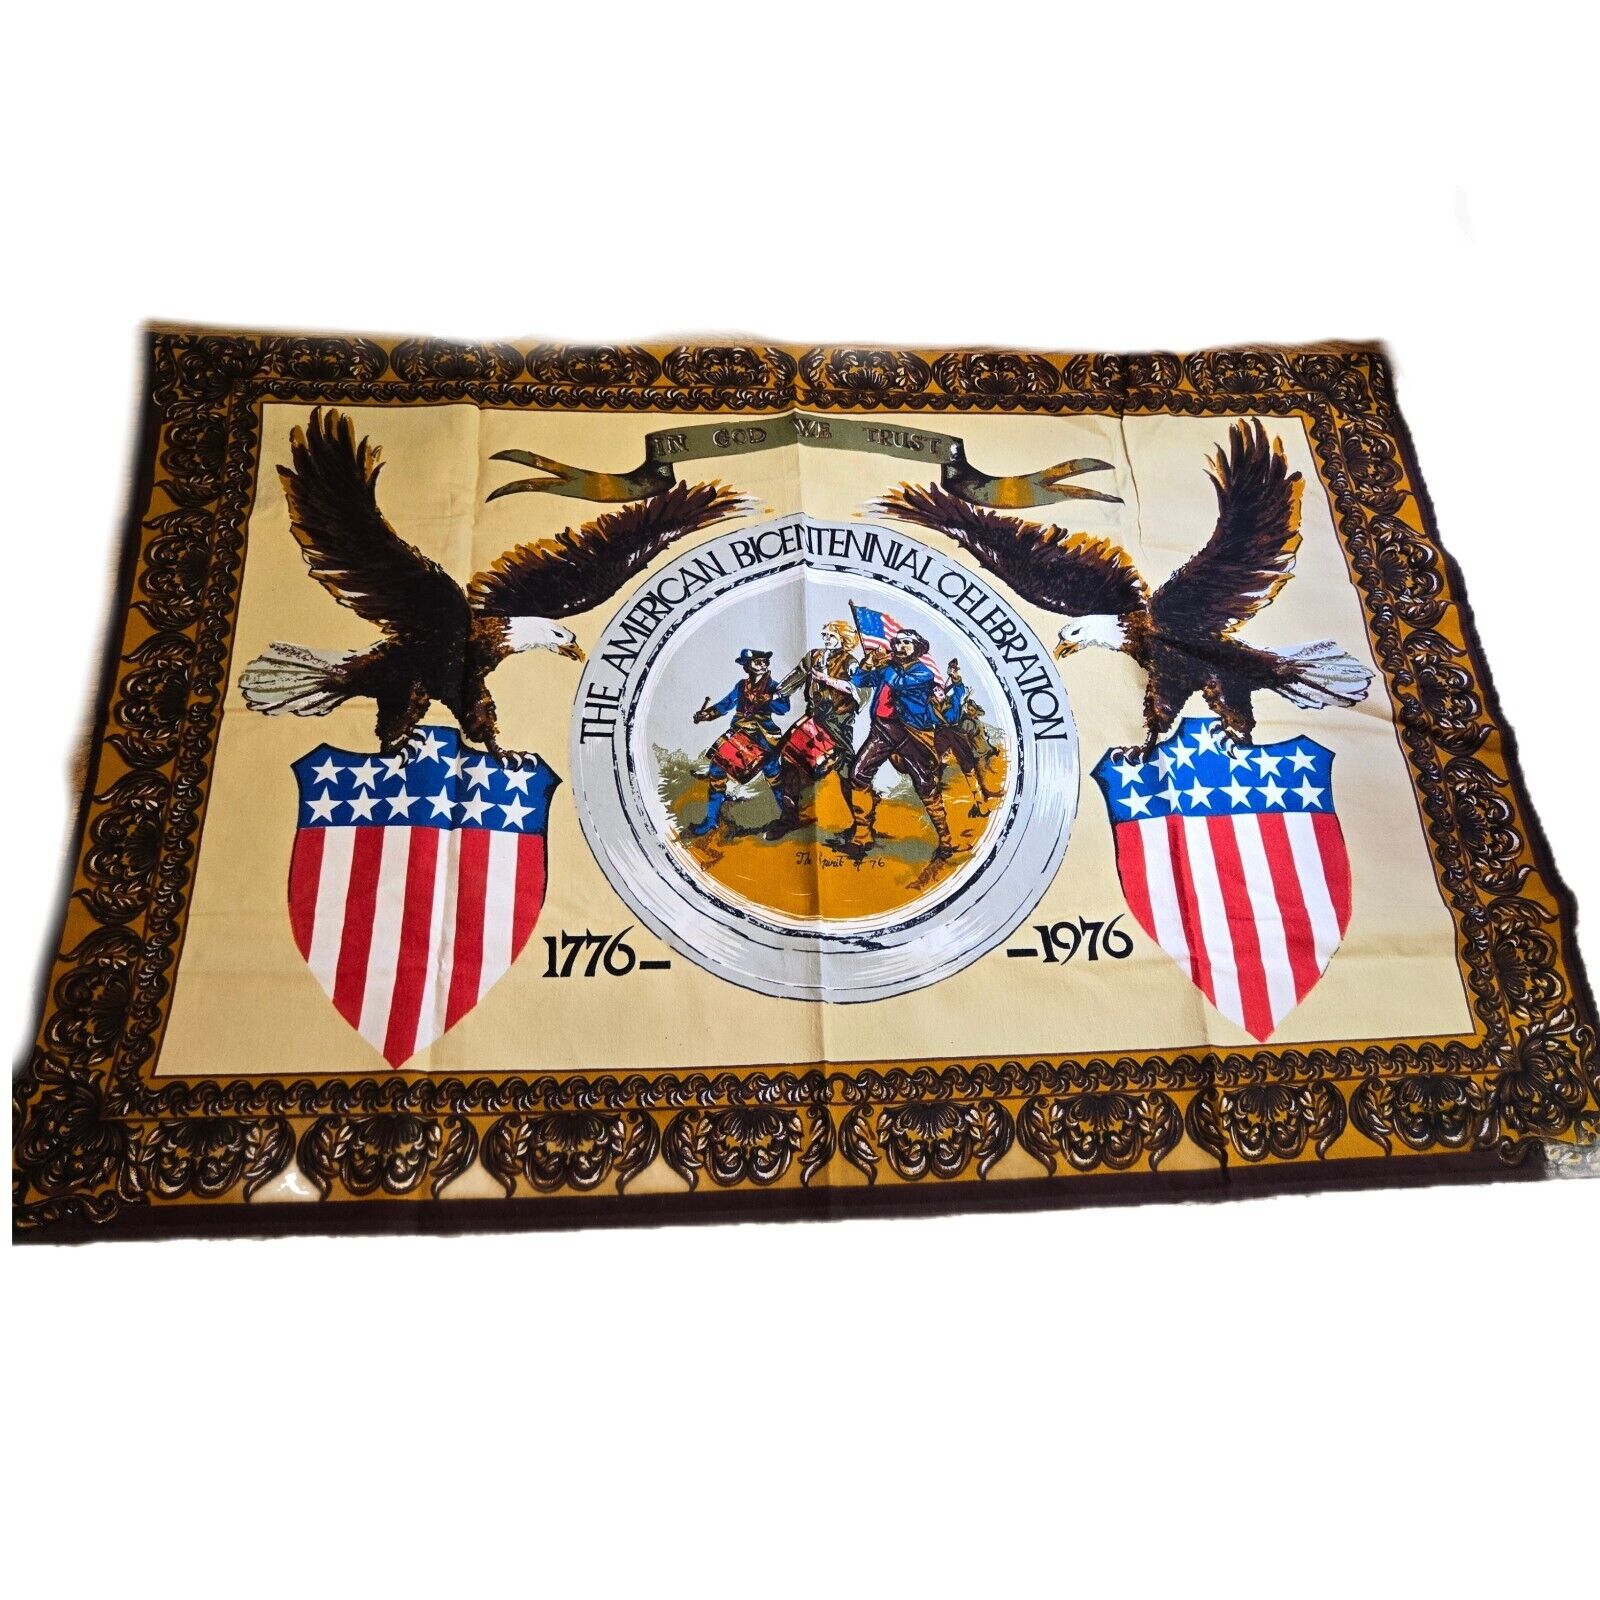  American Bicentennial Colonial 1776-1976 Vintage Tapestry Wall Hanging 57X38 